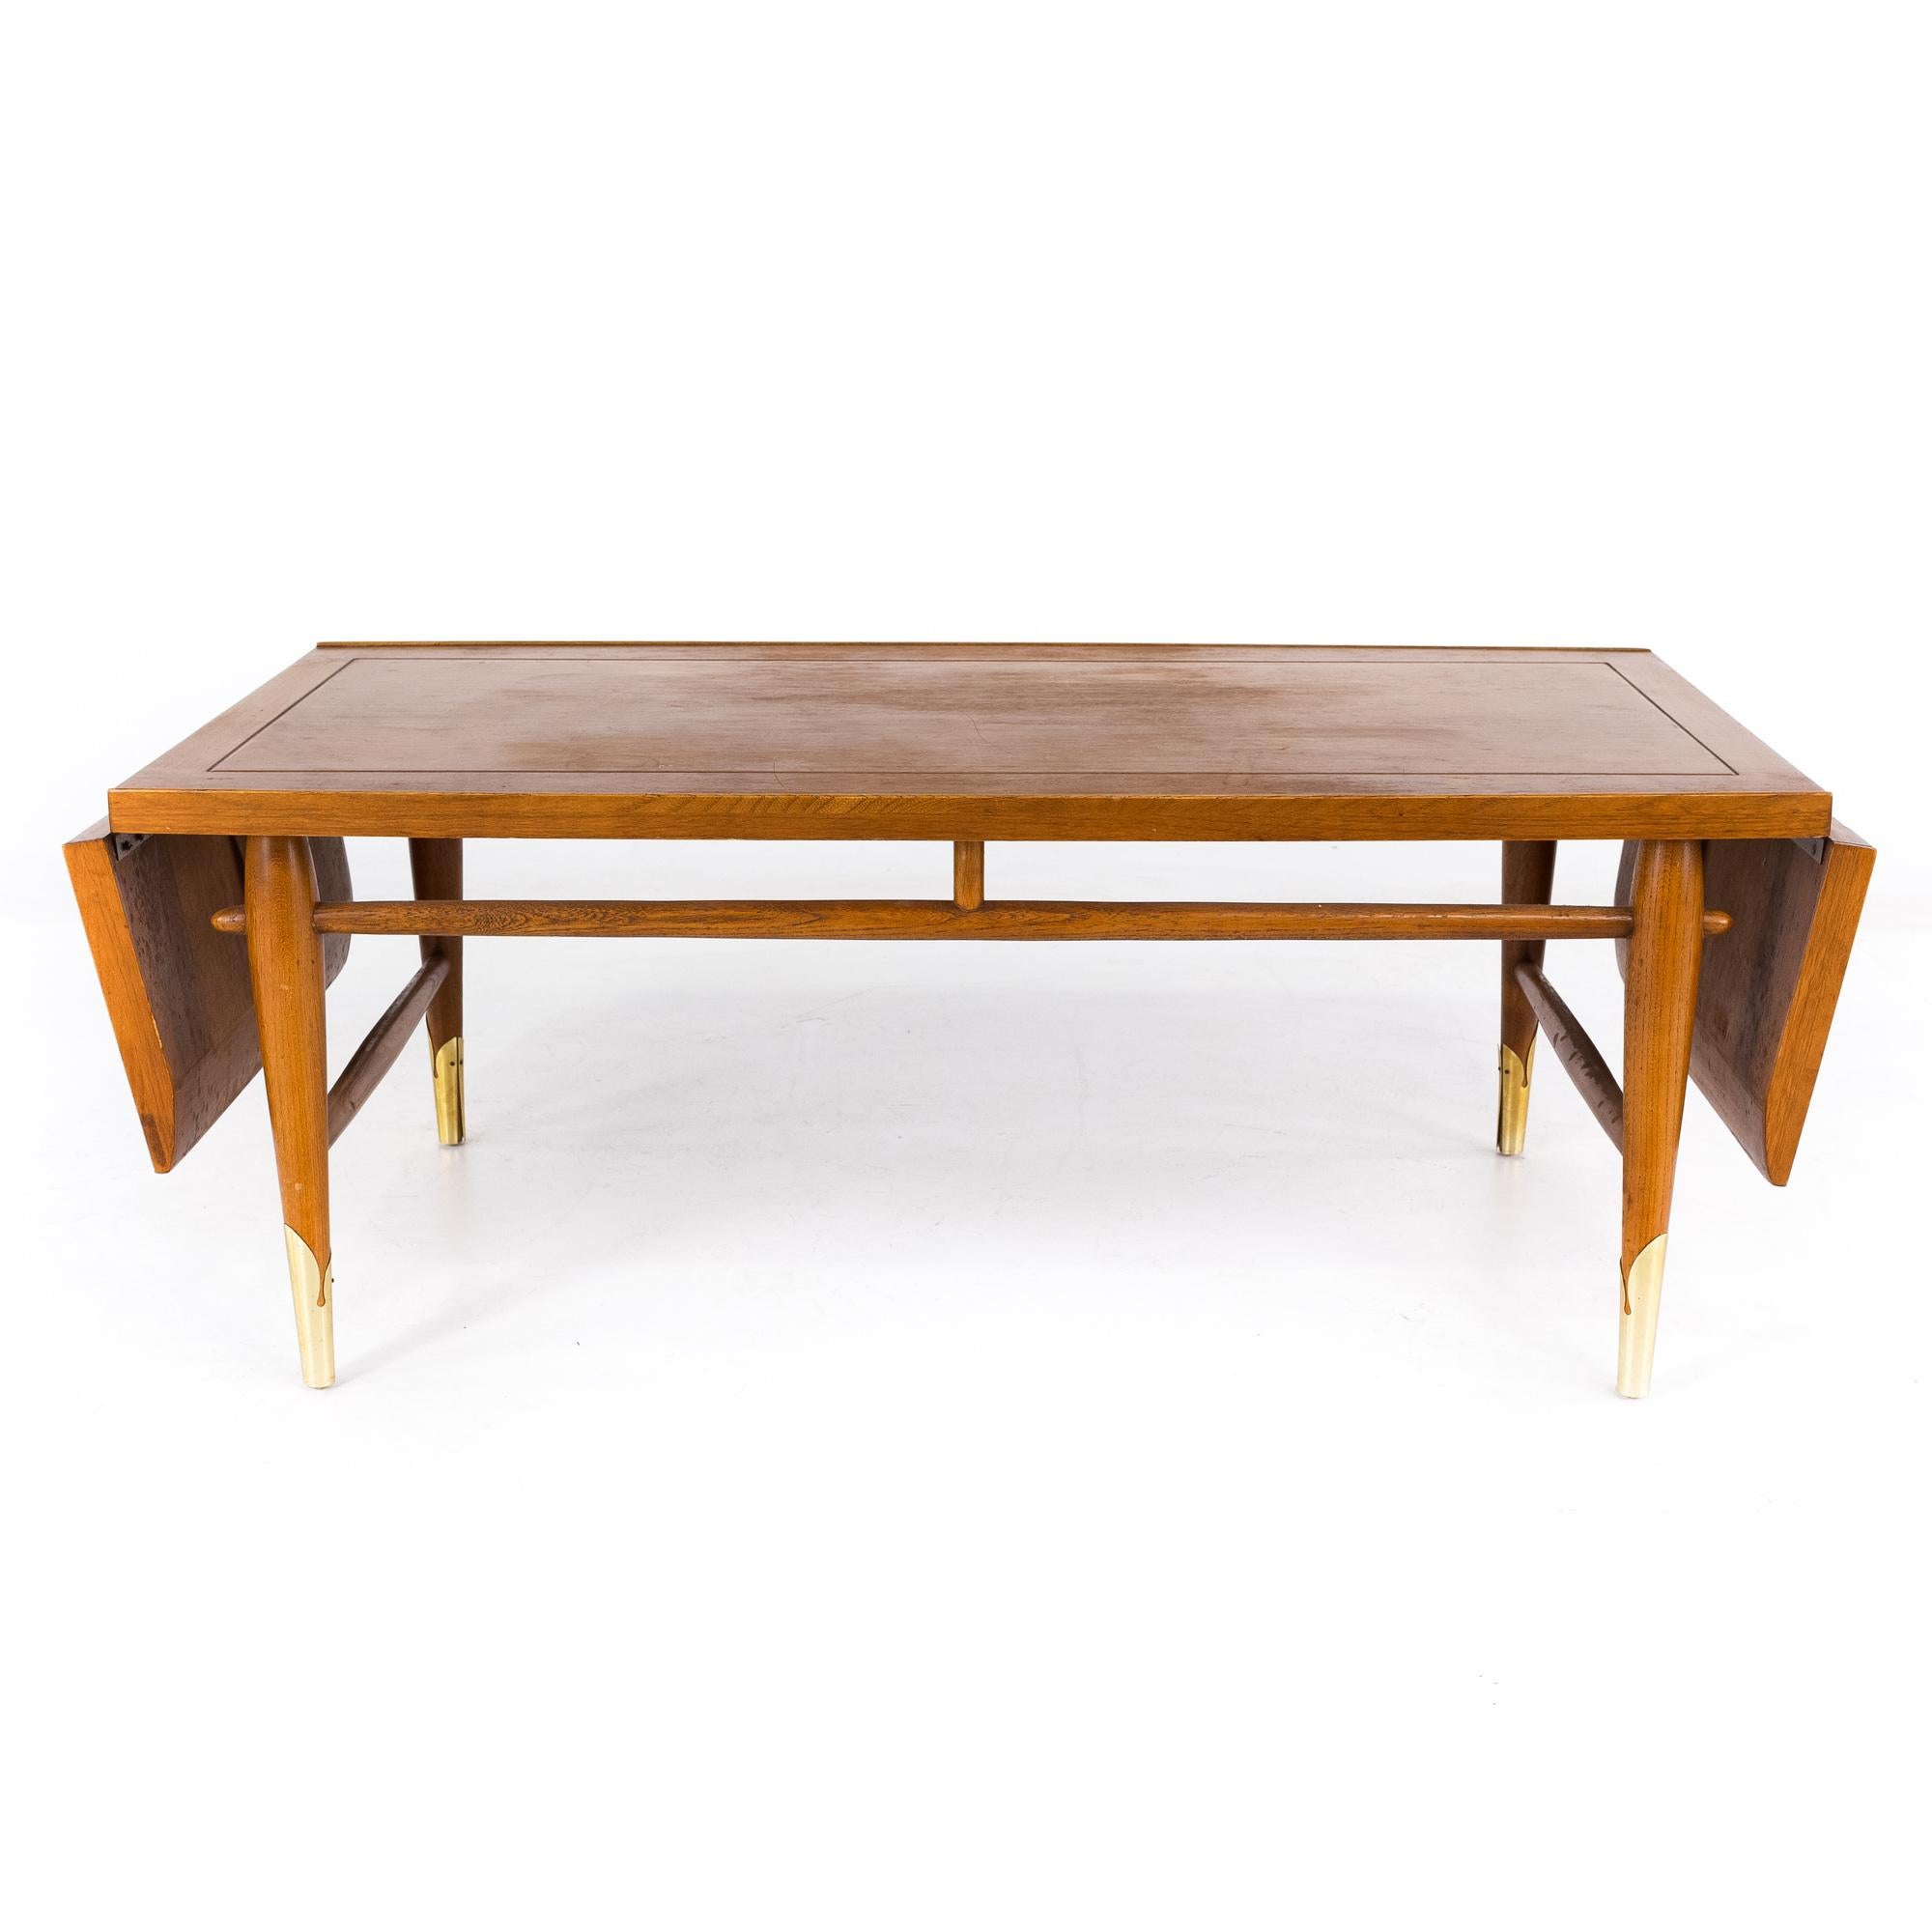 Lane Copenhagen mid century walnut and brass drop leaf coffee table

This table measures: 60 wide x 23 deep x 17 inches high

All pieces of furniture can be had in what we call restored vintage condition. That means the piece is restored upon